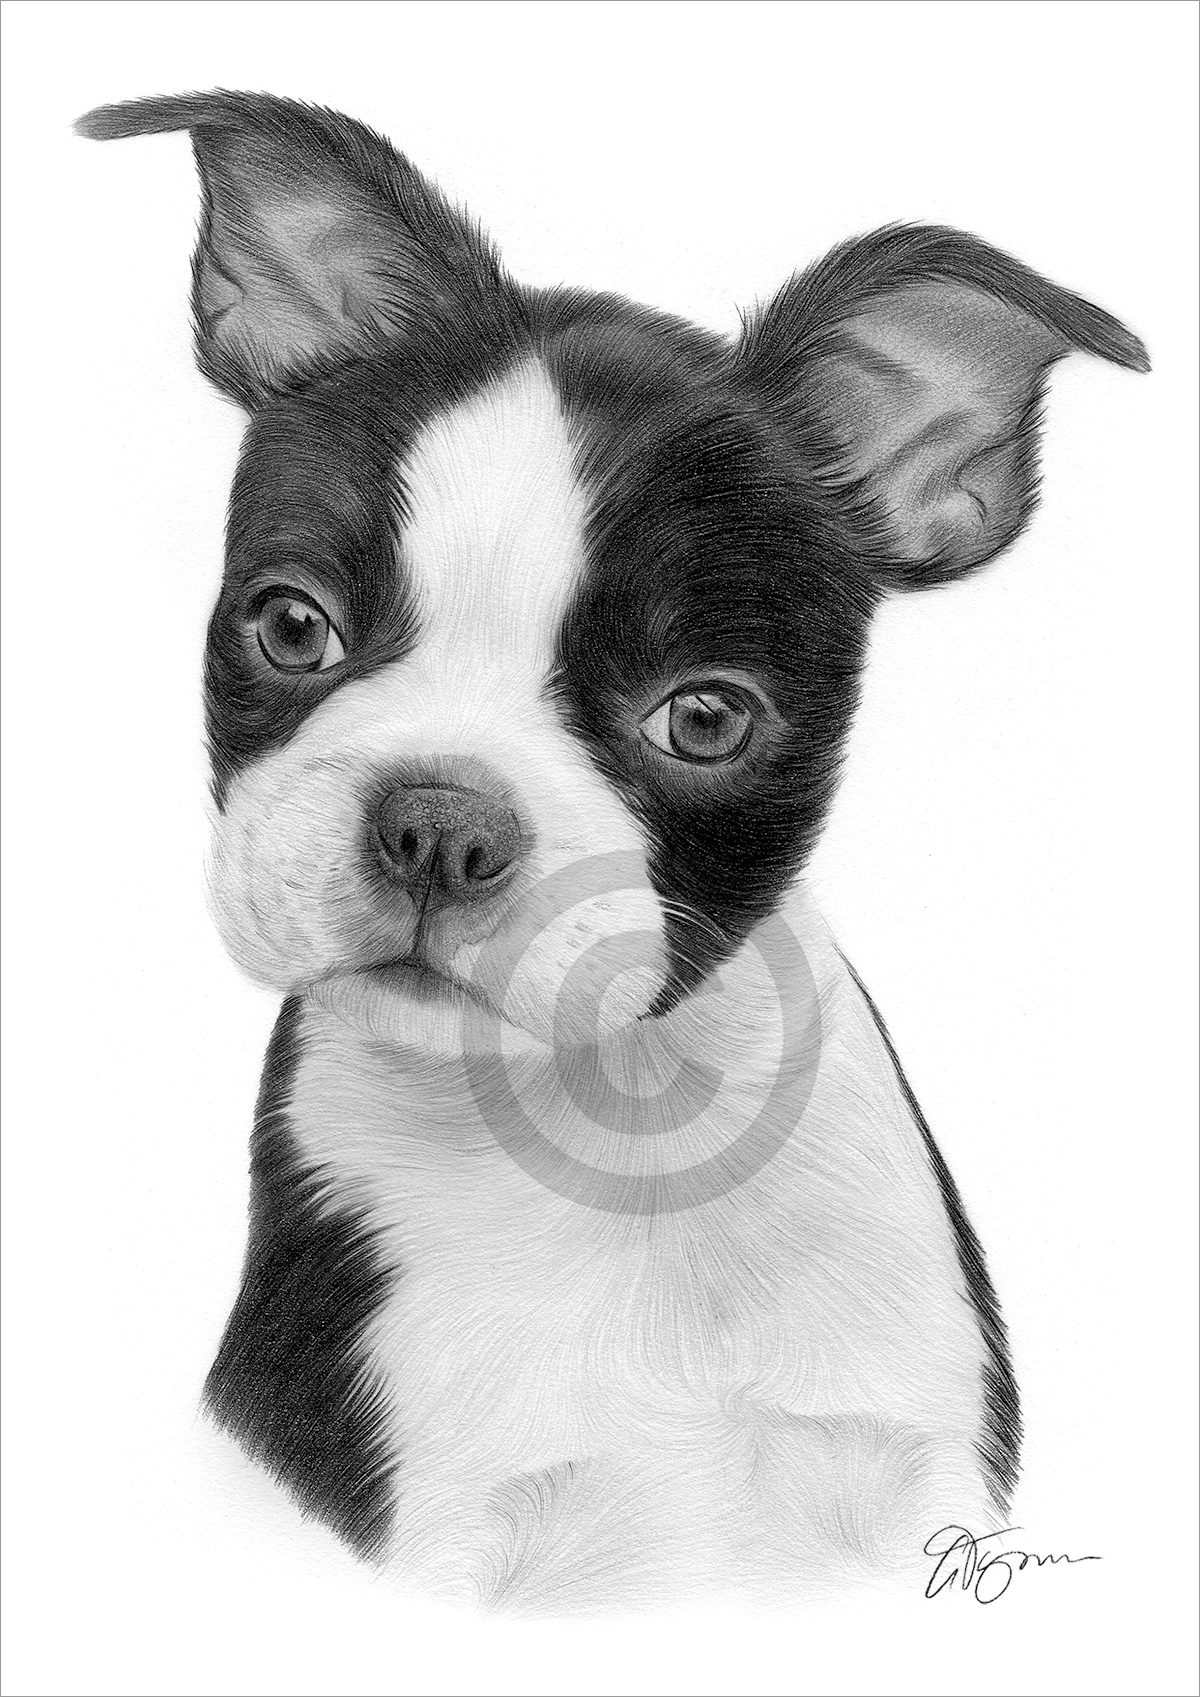 Pencil drawing of a young Boston Terrier puppy by artist Gary Tymon